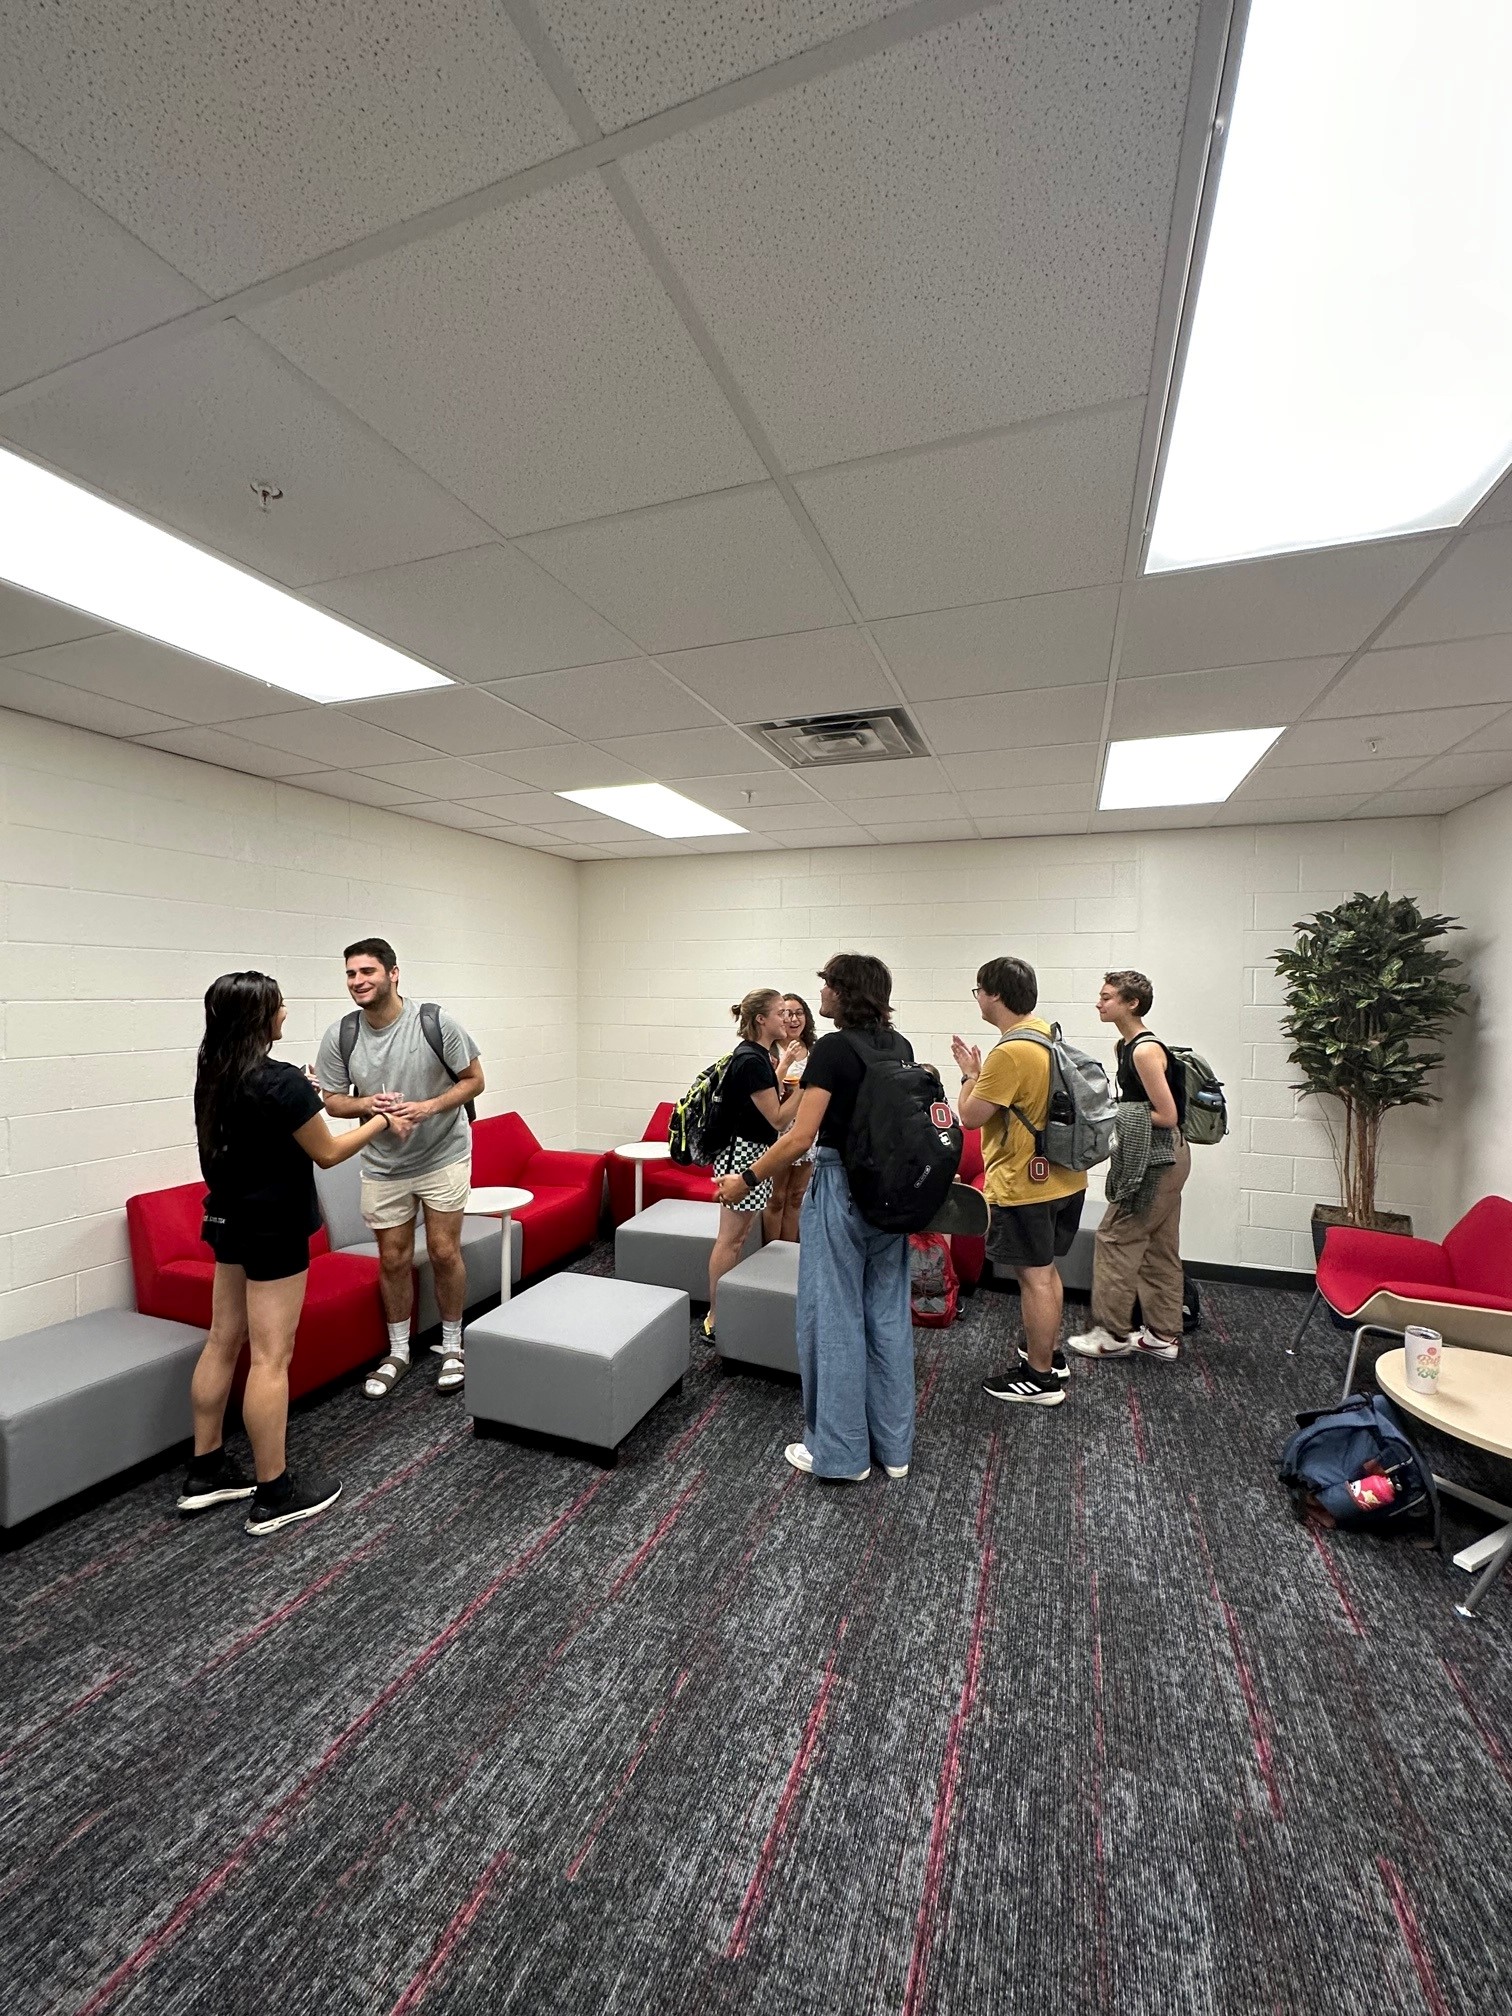 Photo of students talking and laughing in room with red and grey couch